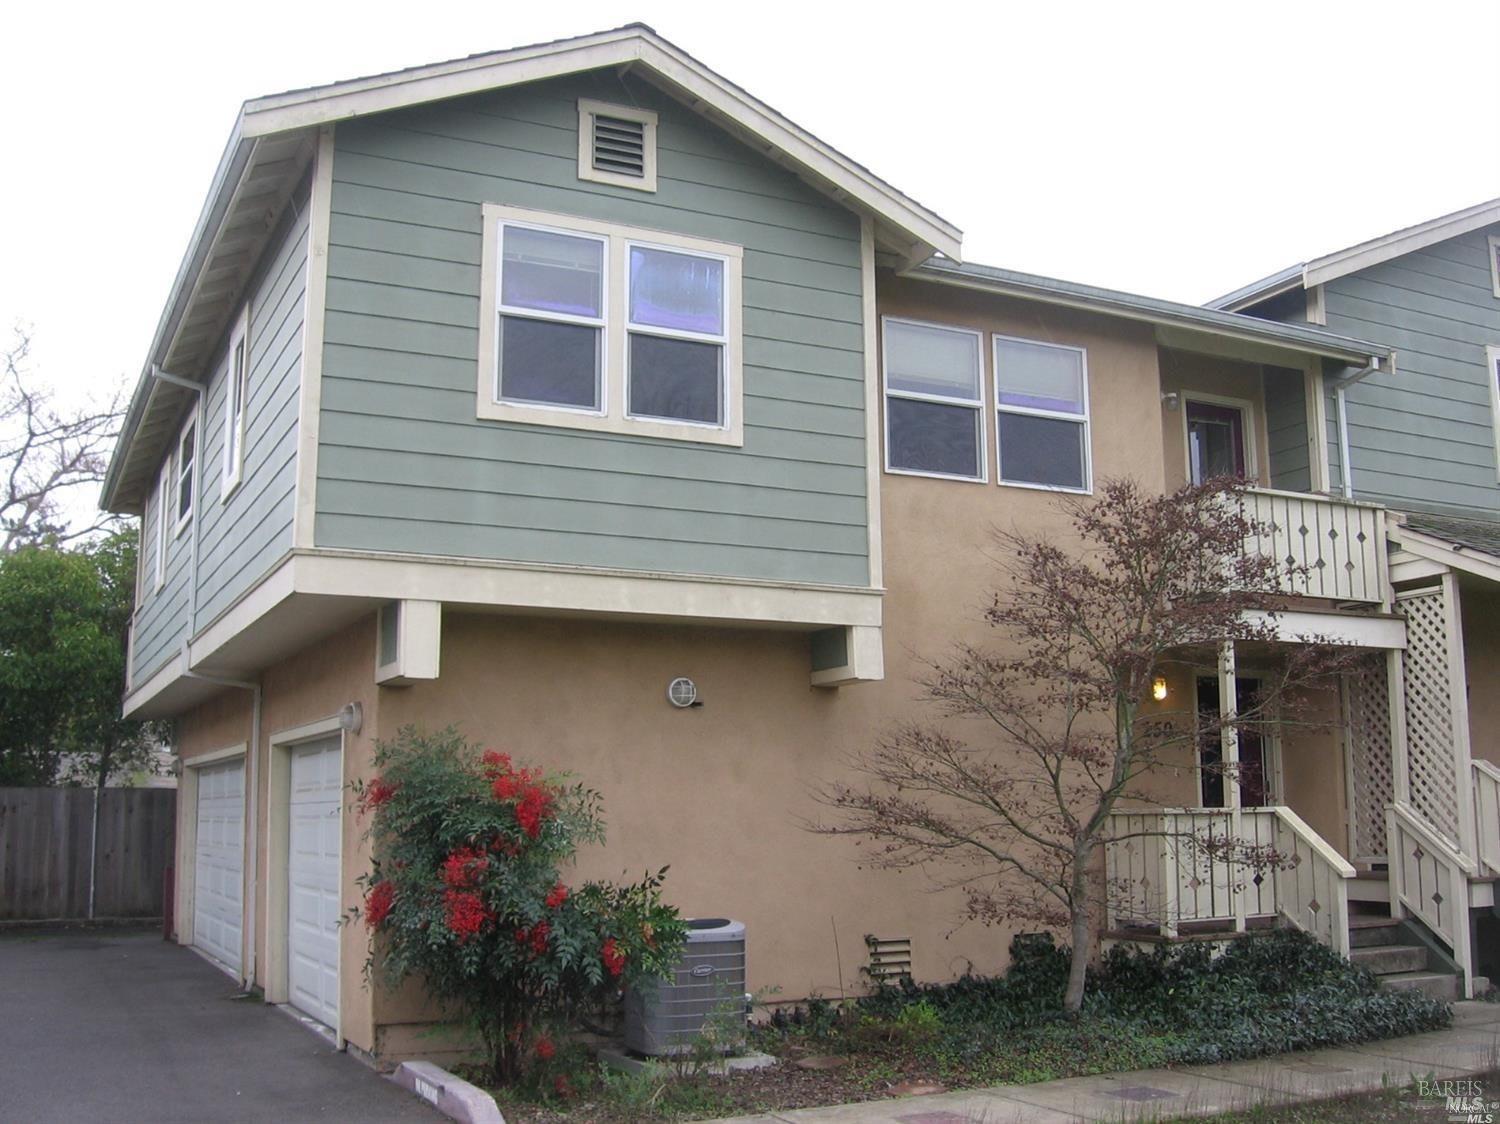 Photo of 259 Brown St in Napa, CA